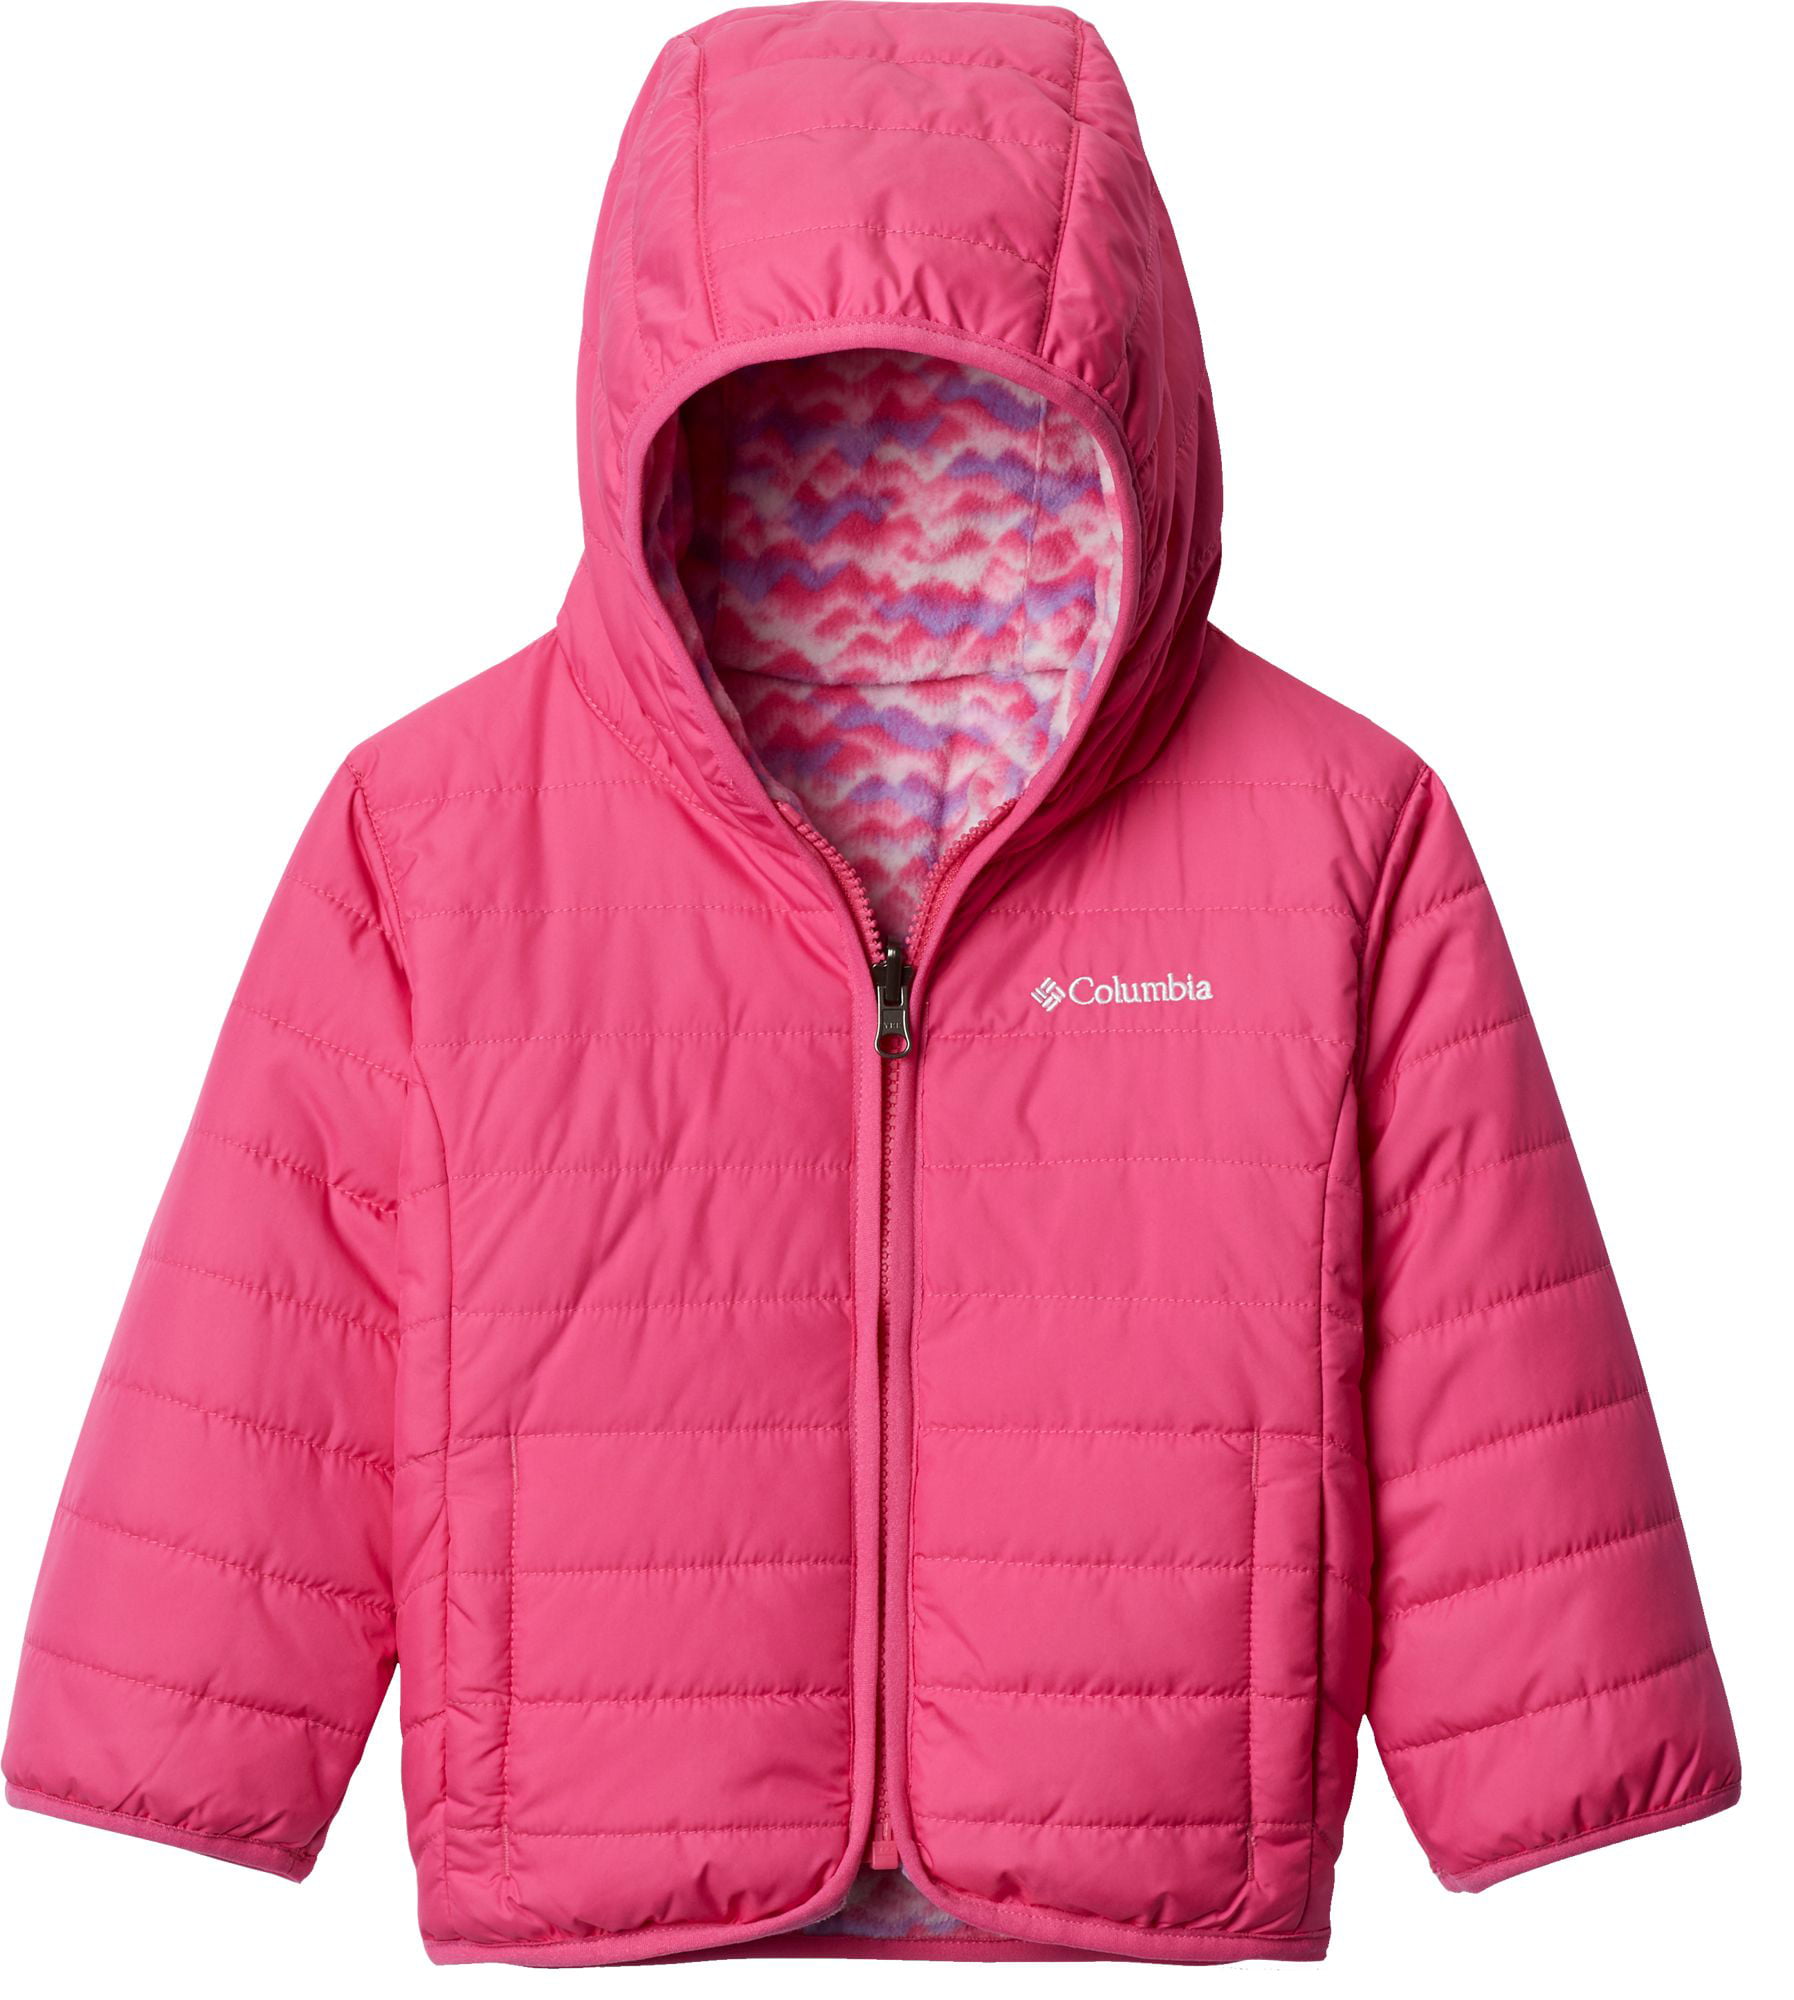 toddler double trouble jacket